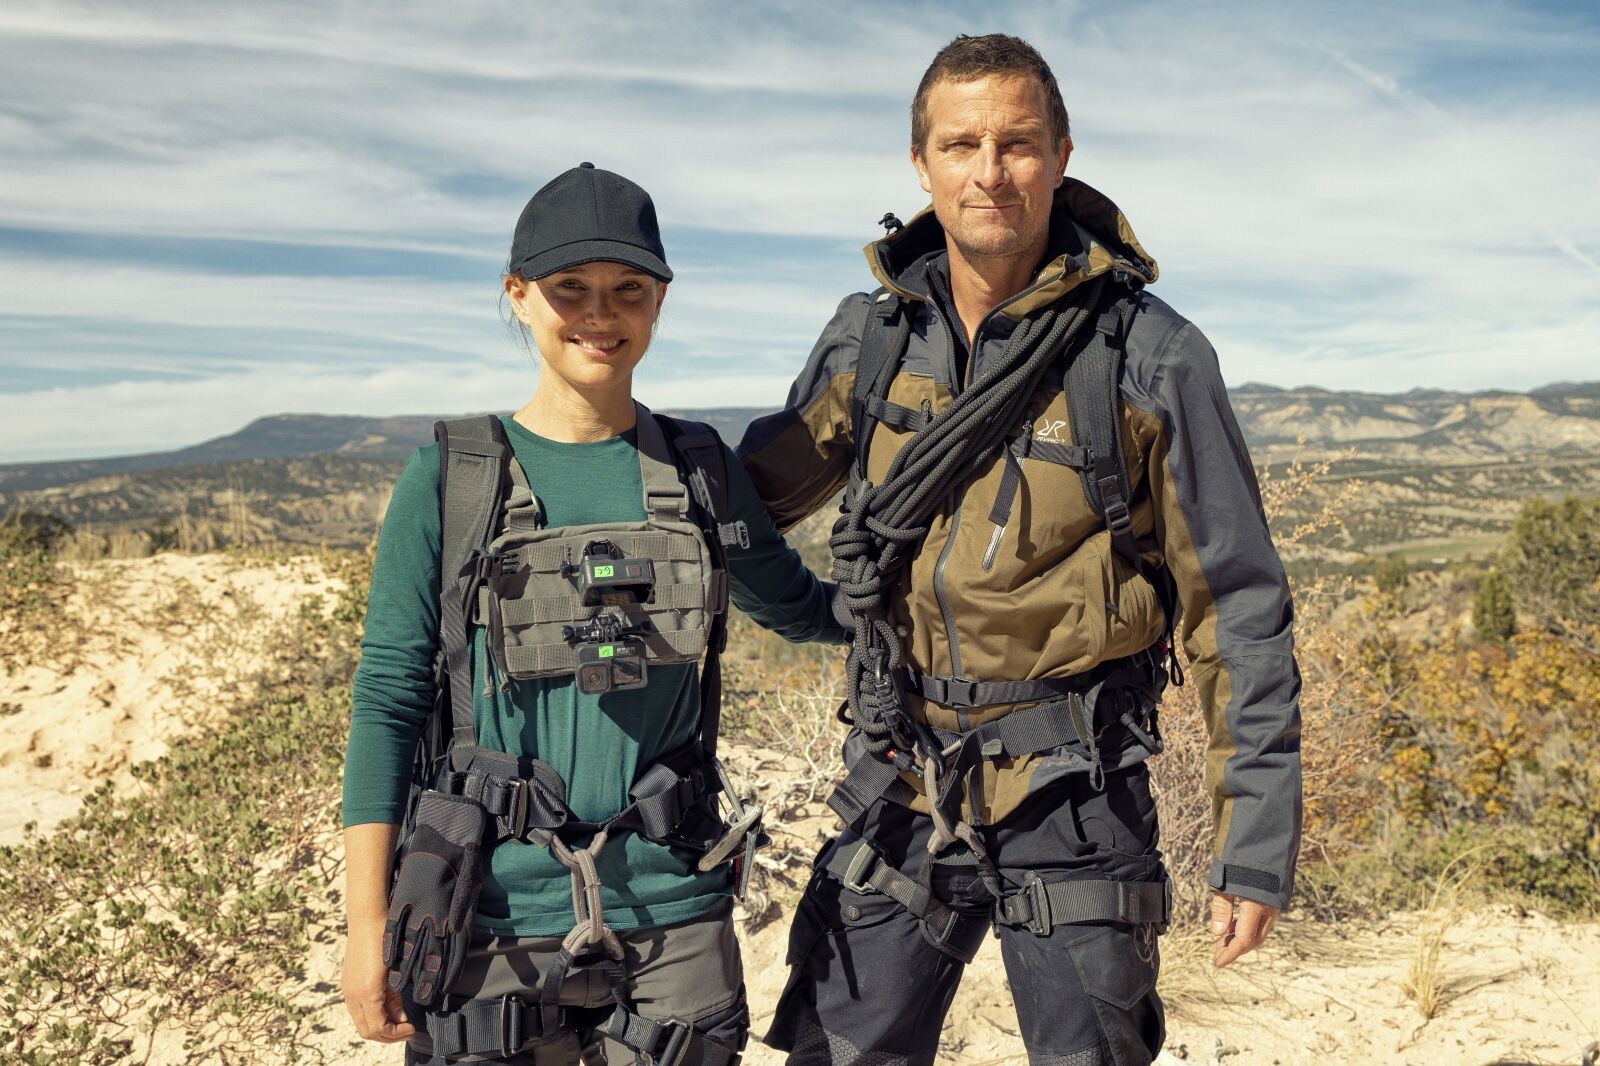 Interview With Bear Grylls Reveals His Top Survival Tips